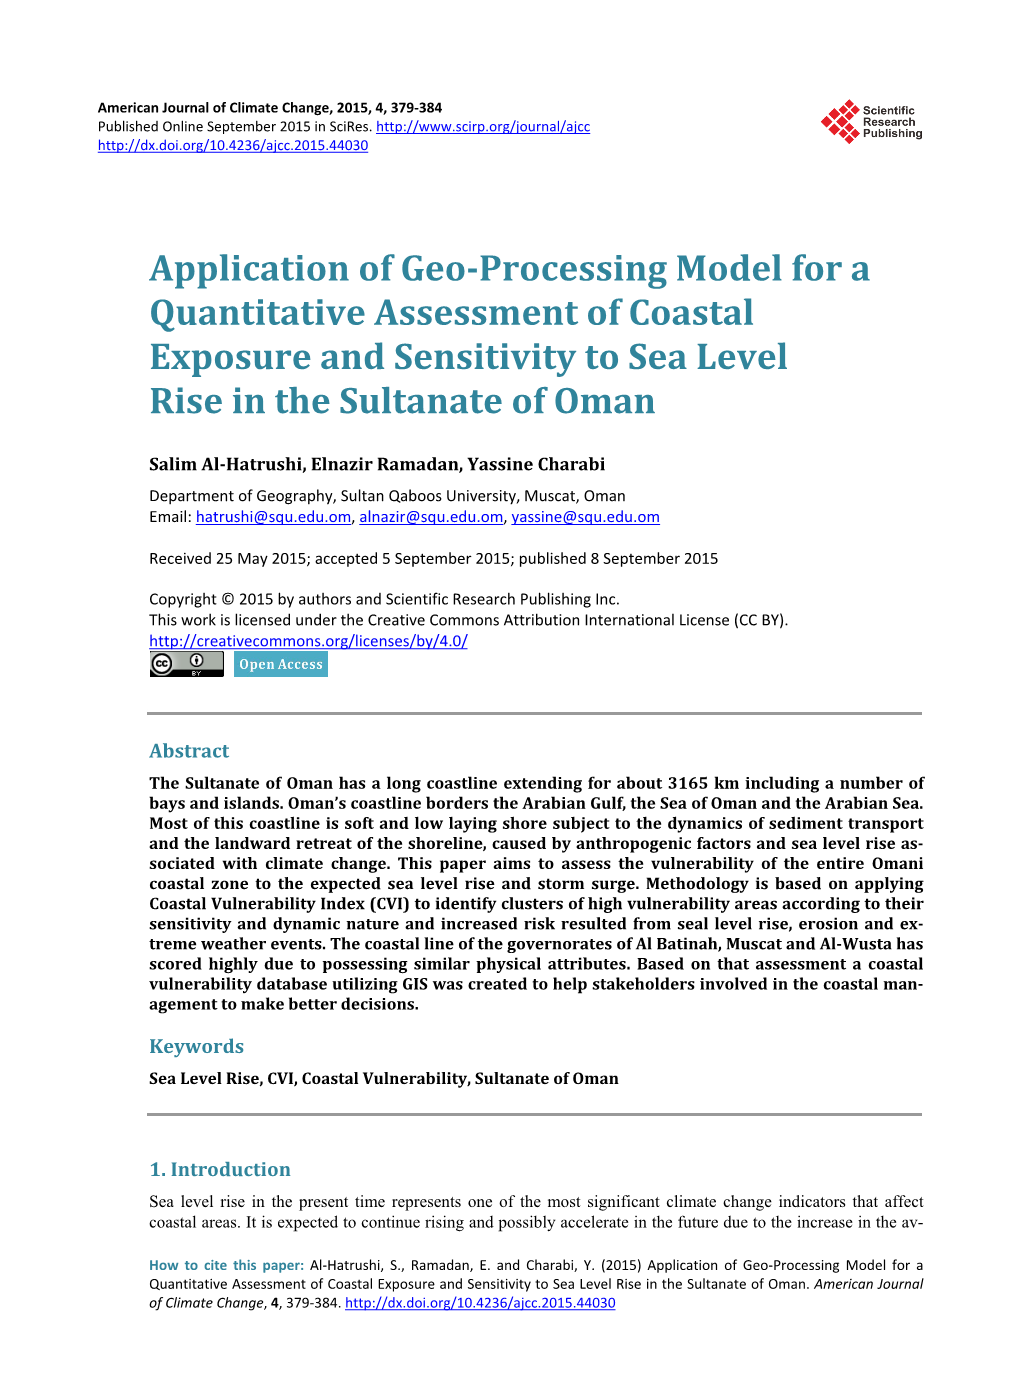 Application of Geo-Processing Model for a Quantitative Assessment of Coastal Exposure and Sensitivity to Sea Level Rise in the Sultanate of Oman